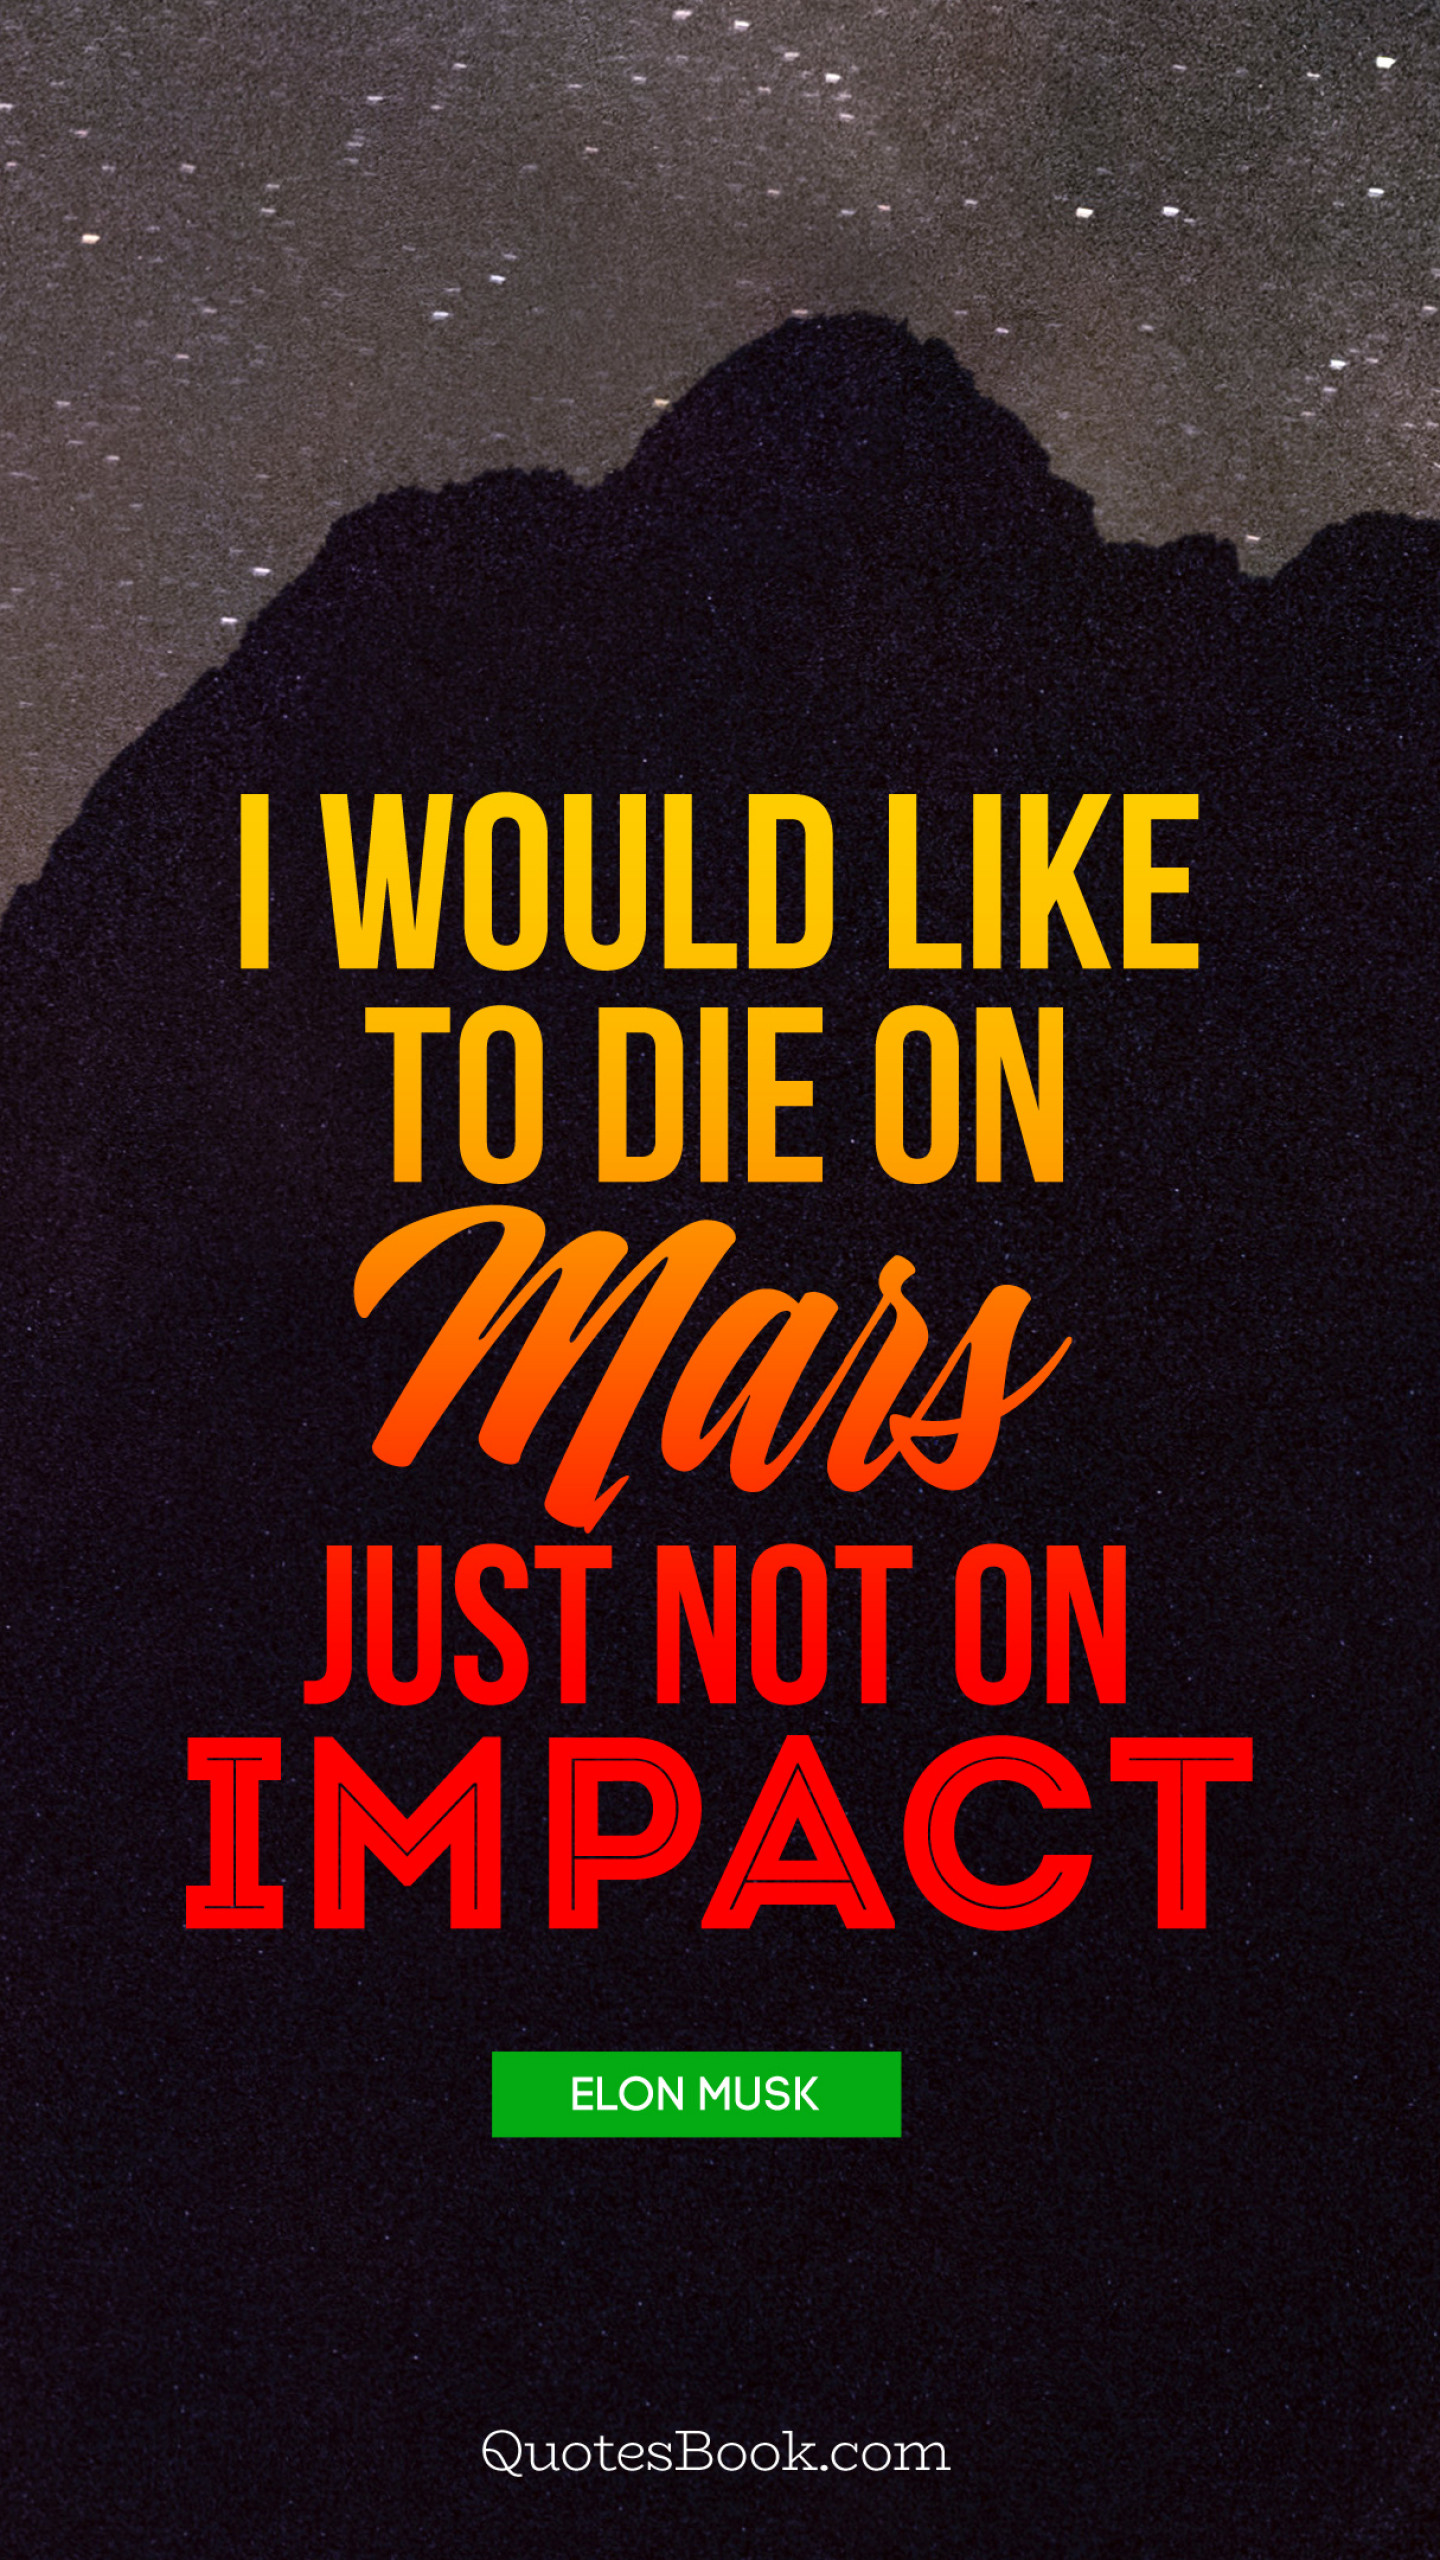 I'd like to die on Mars just not on impact NEW POSTER Elon Musk fp458 